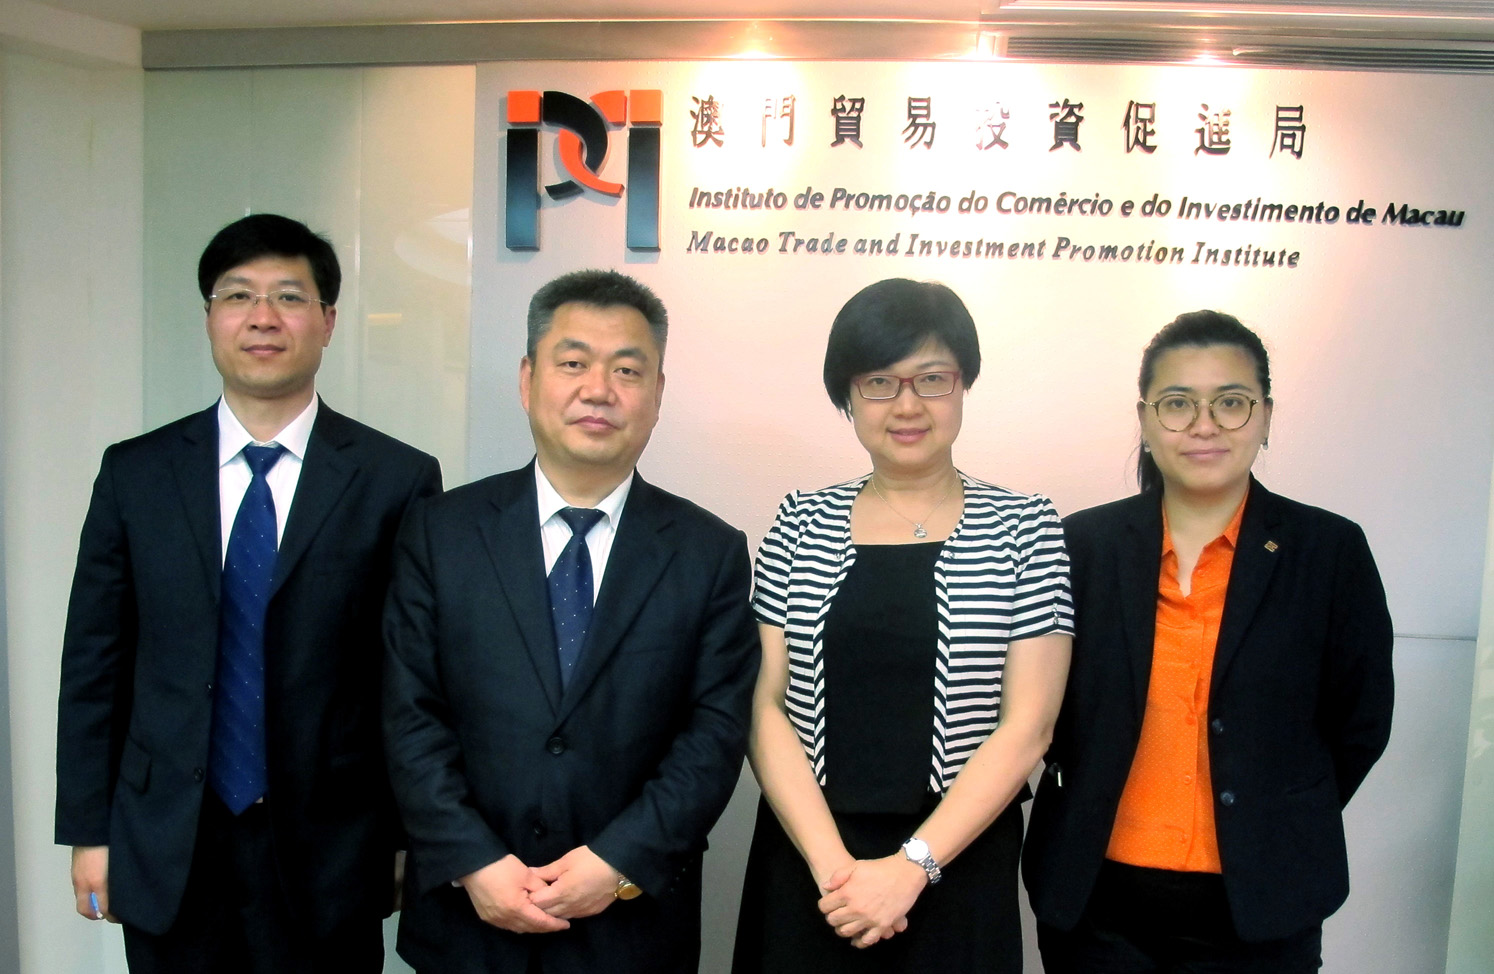 IPIM’s Executive Director Gloria Ung with Director of Shanxi Board of Investment Promotion Jiao Yufeng and the delegation at IPIM (3 June 2016)